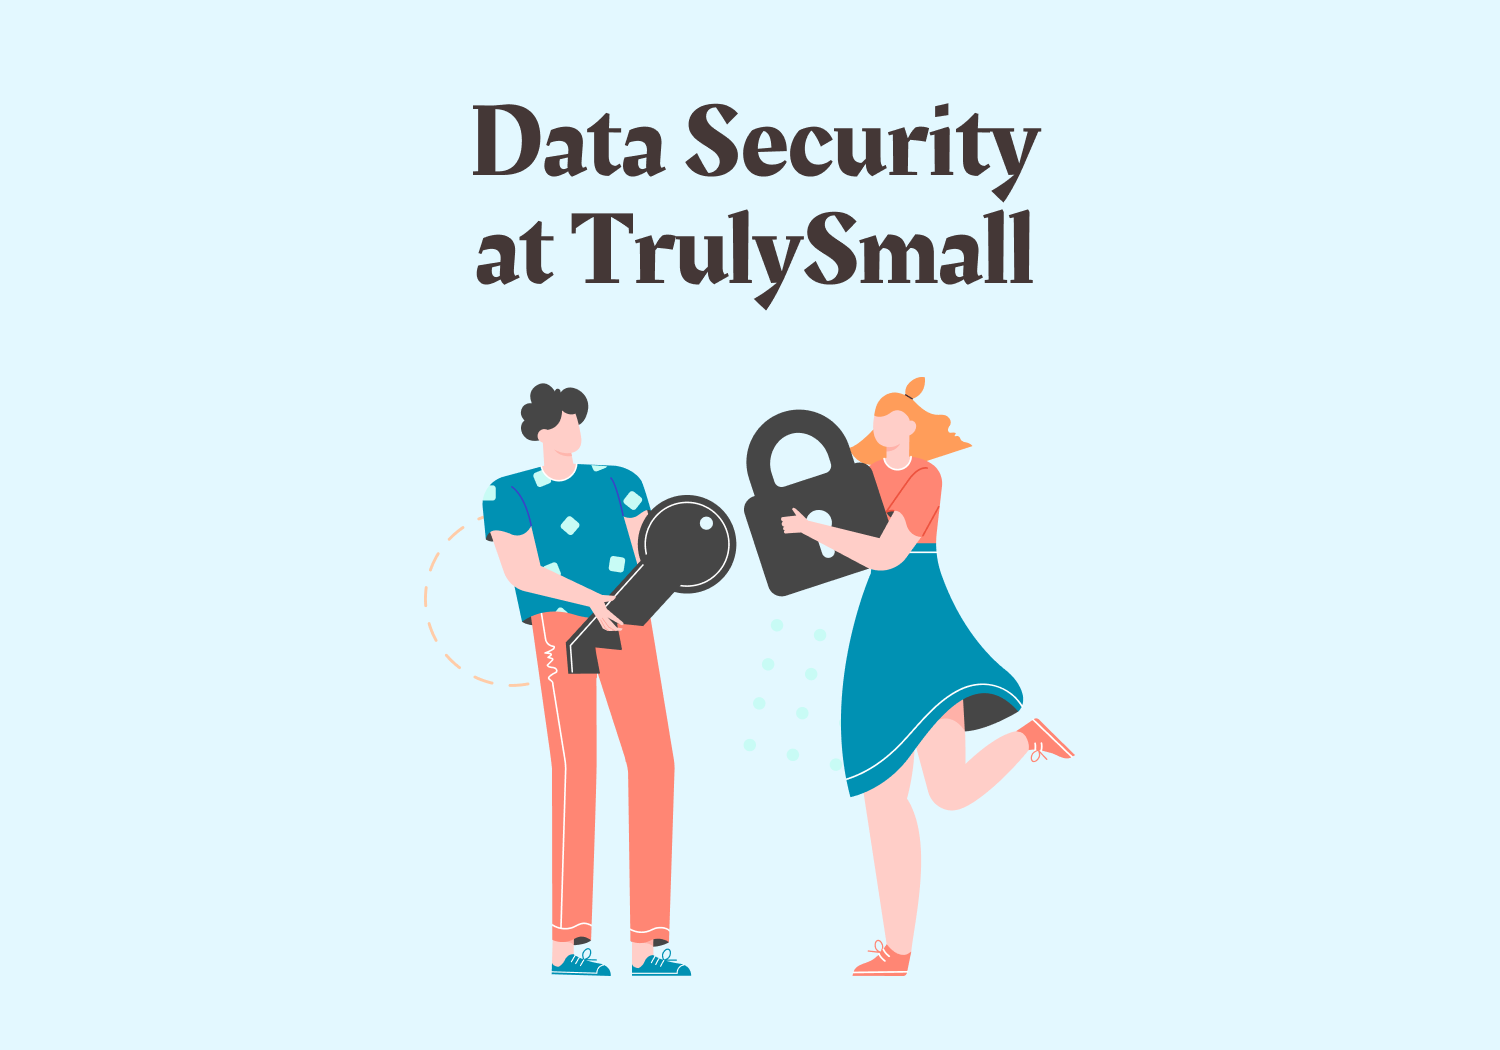 Data Security at TrulySmall